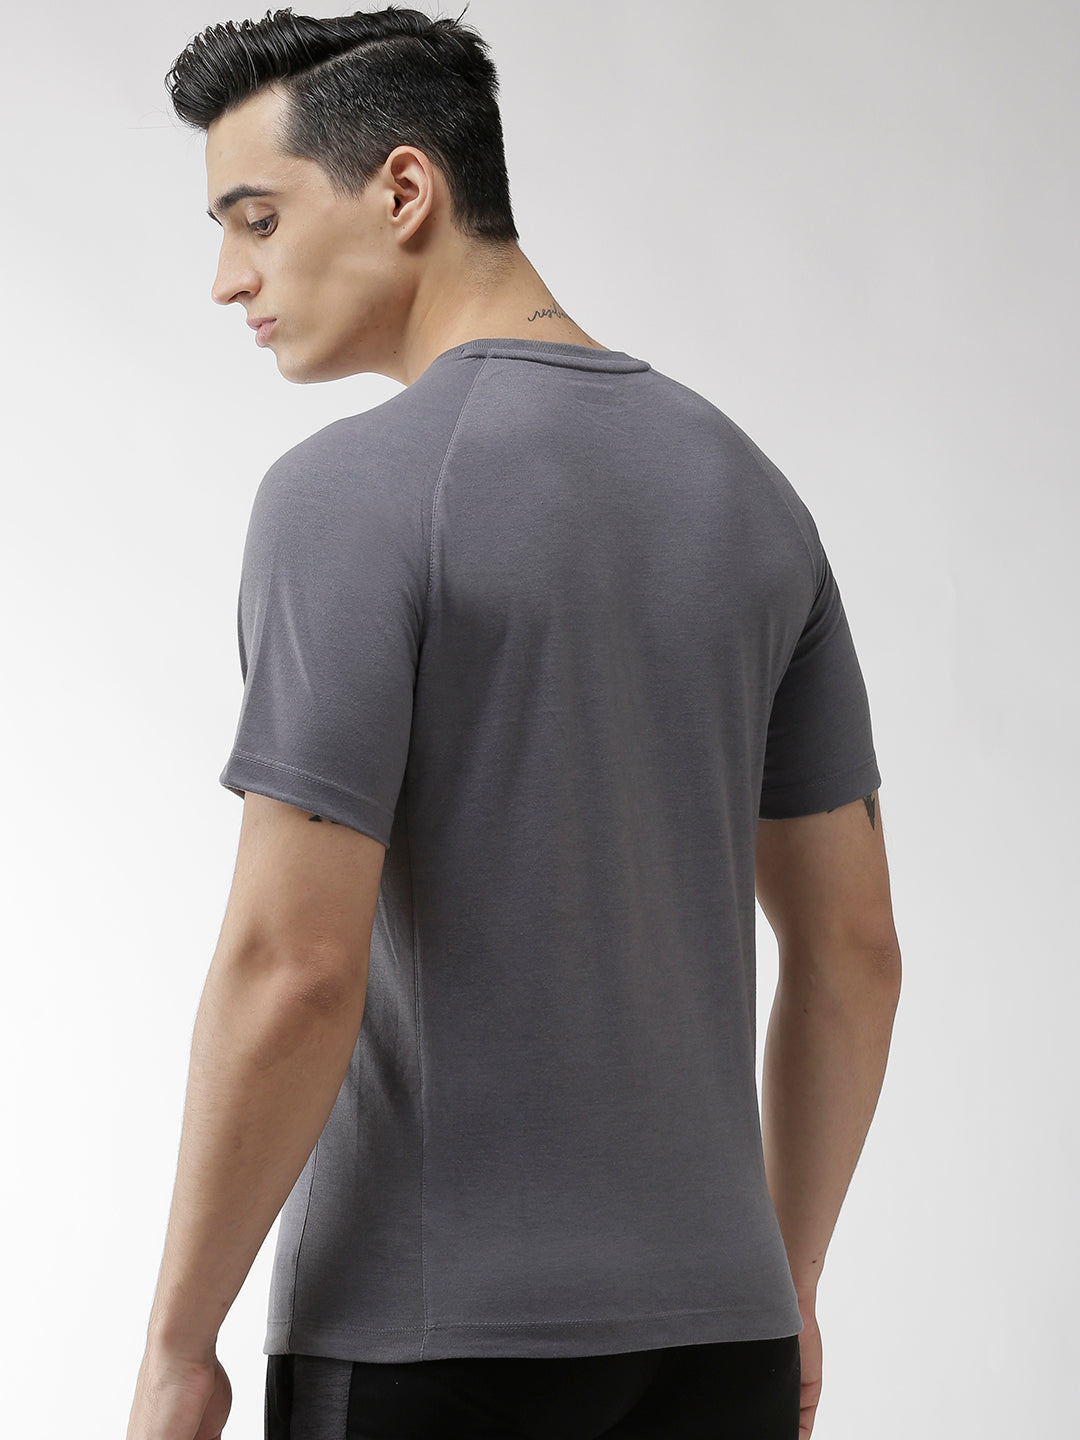 Alcis Men Charcoal Grey Solid Round Neck Slim Fit Training T-shirt